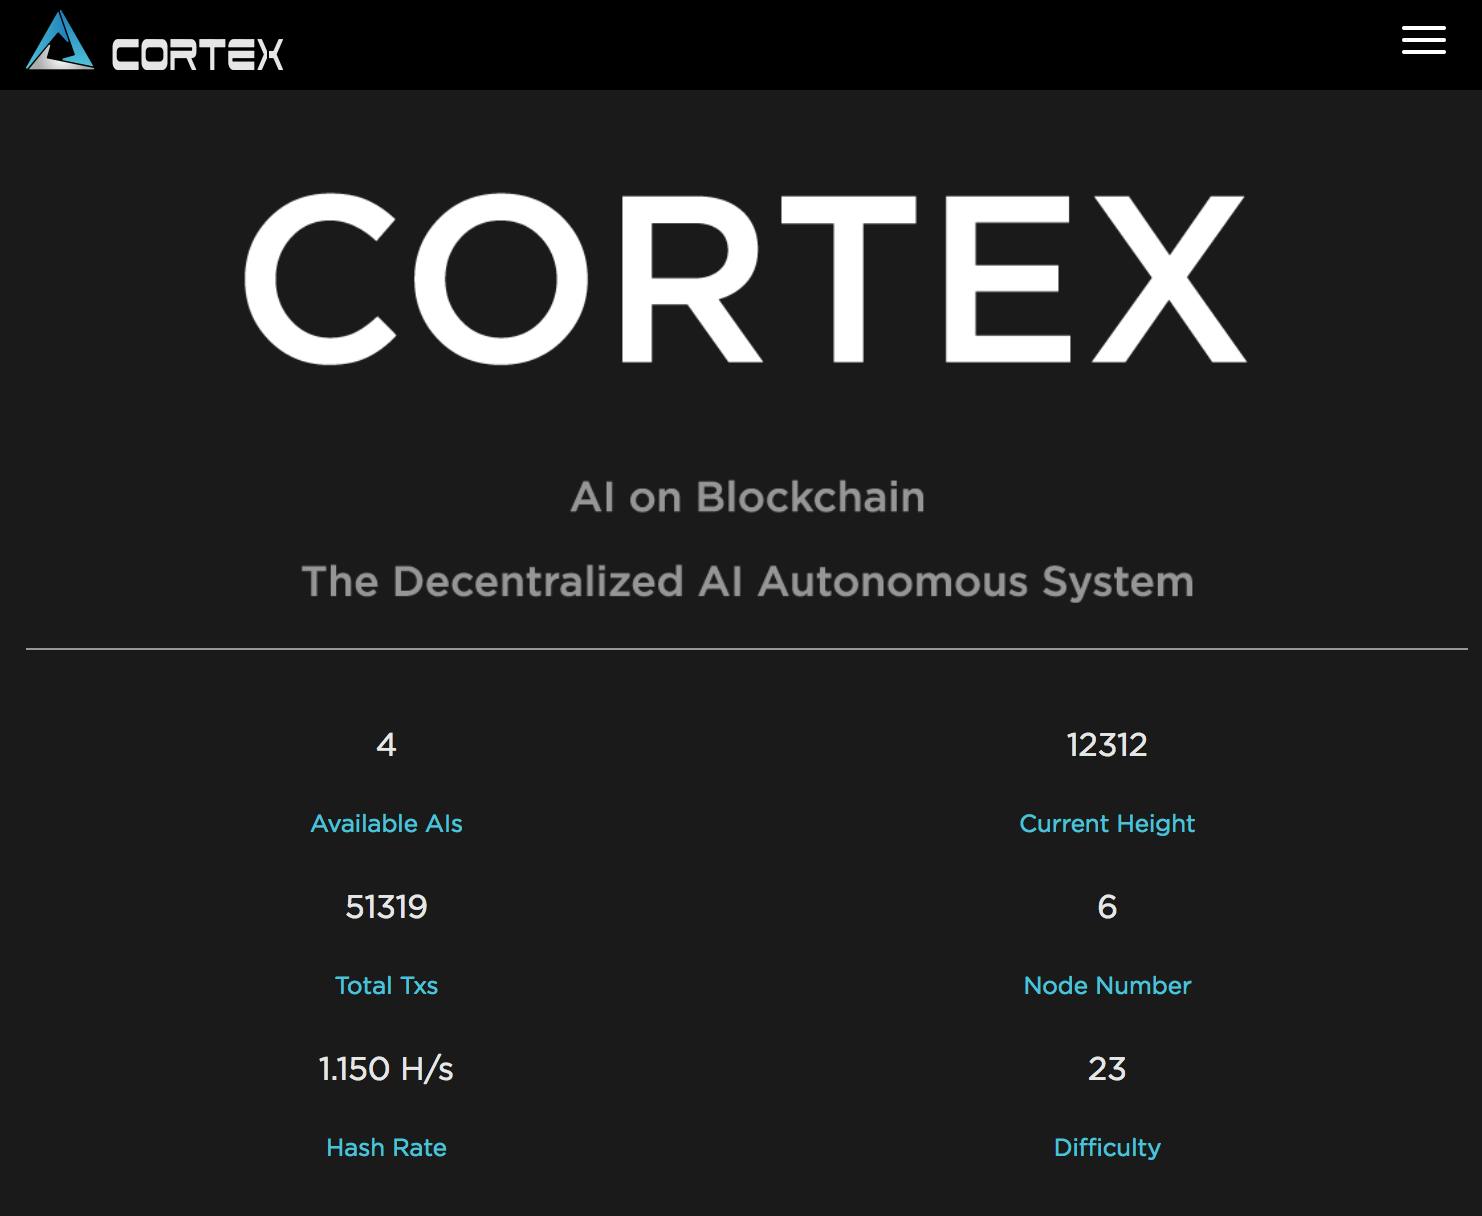 /how-cortex-brings-ai-on-the-blockchain-86d08922bb2a feature image